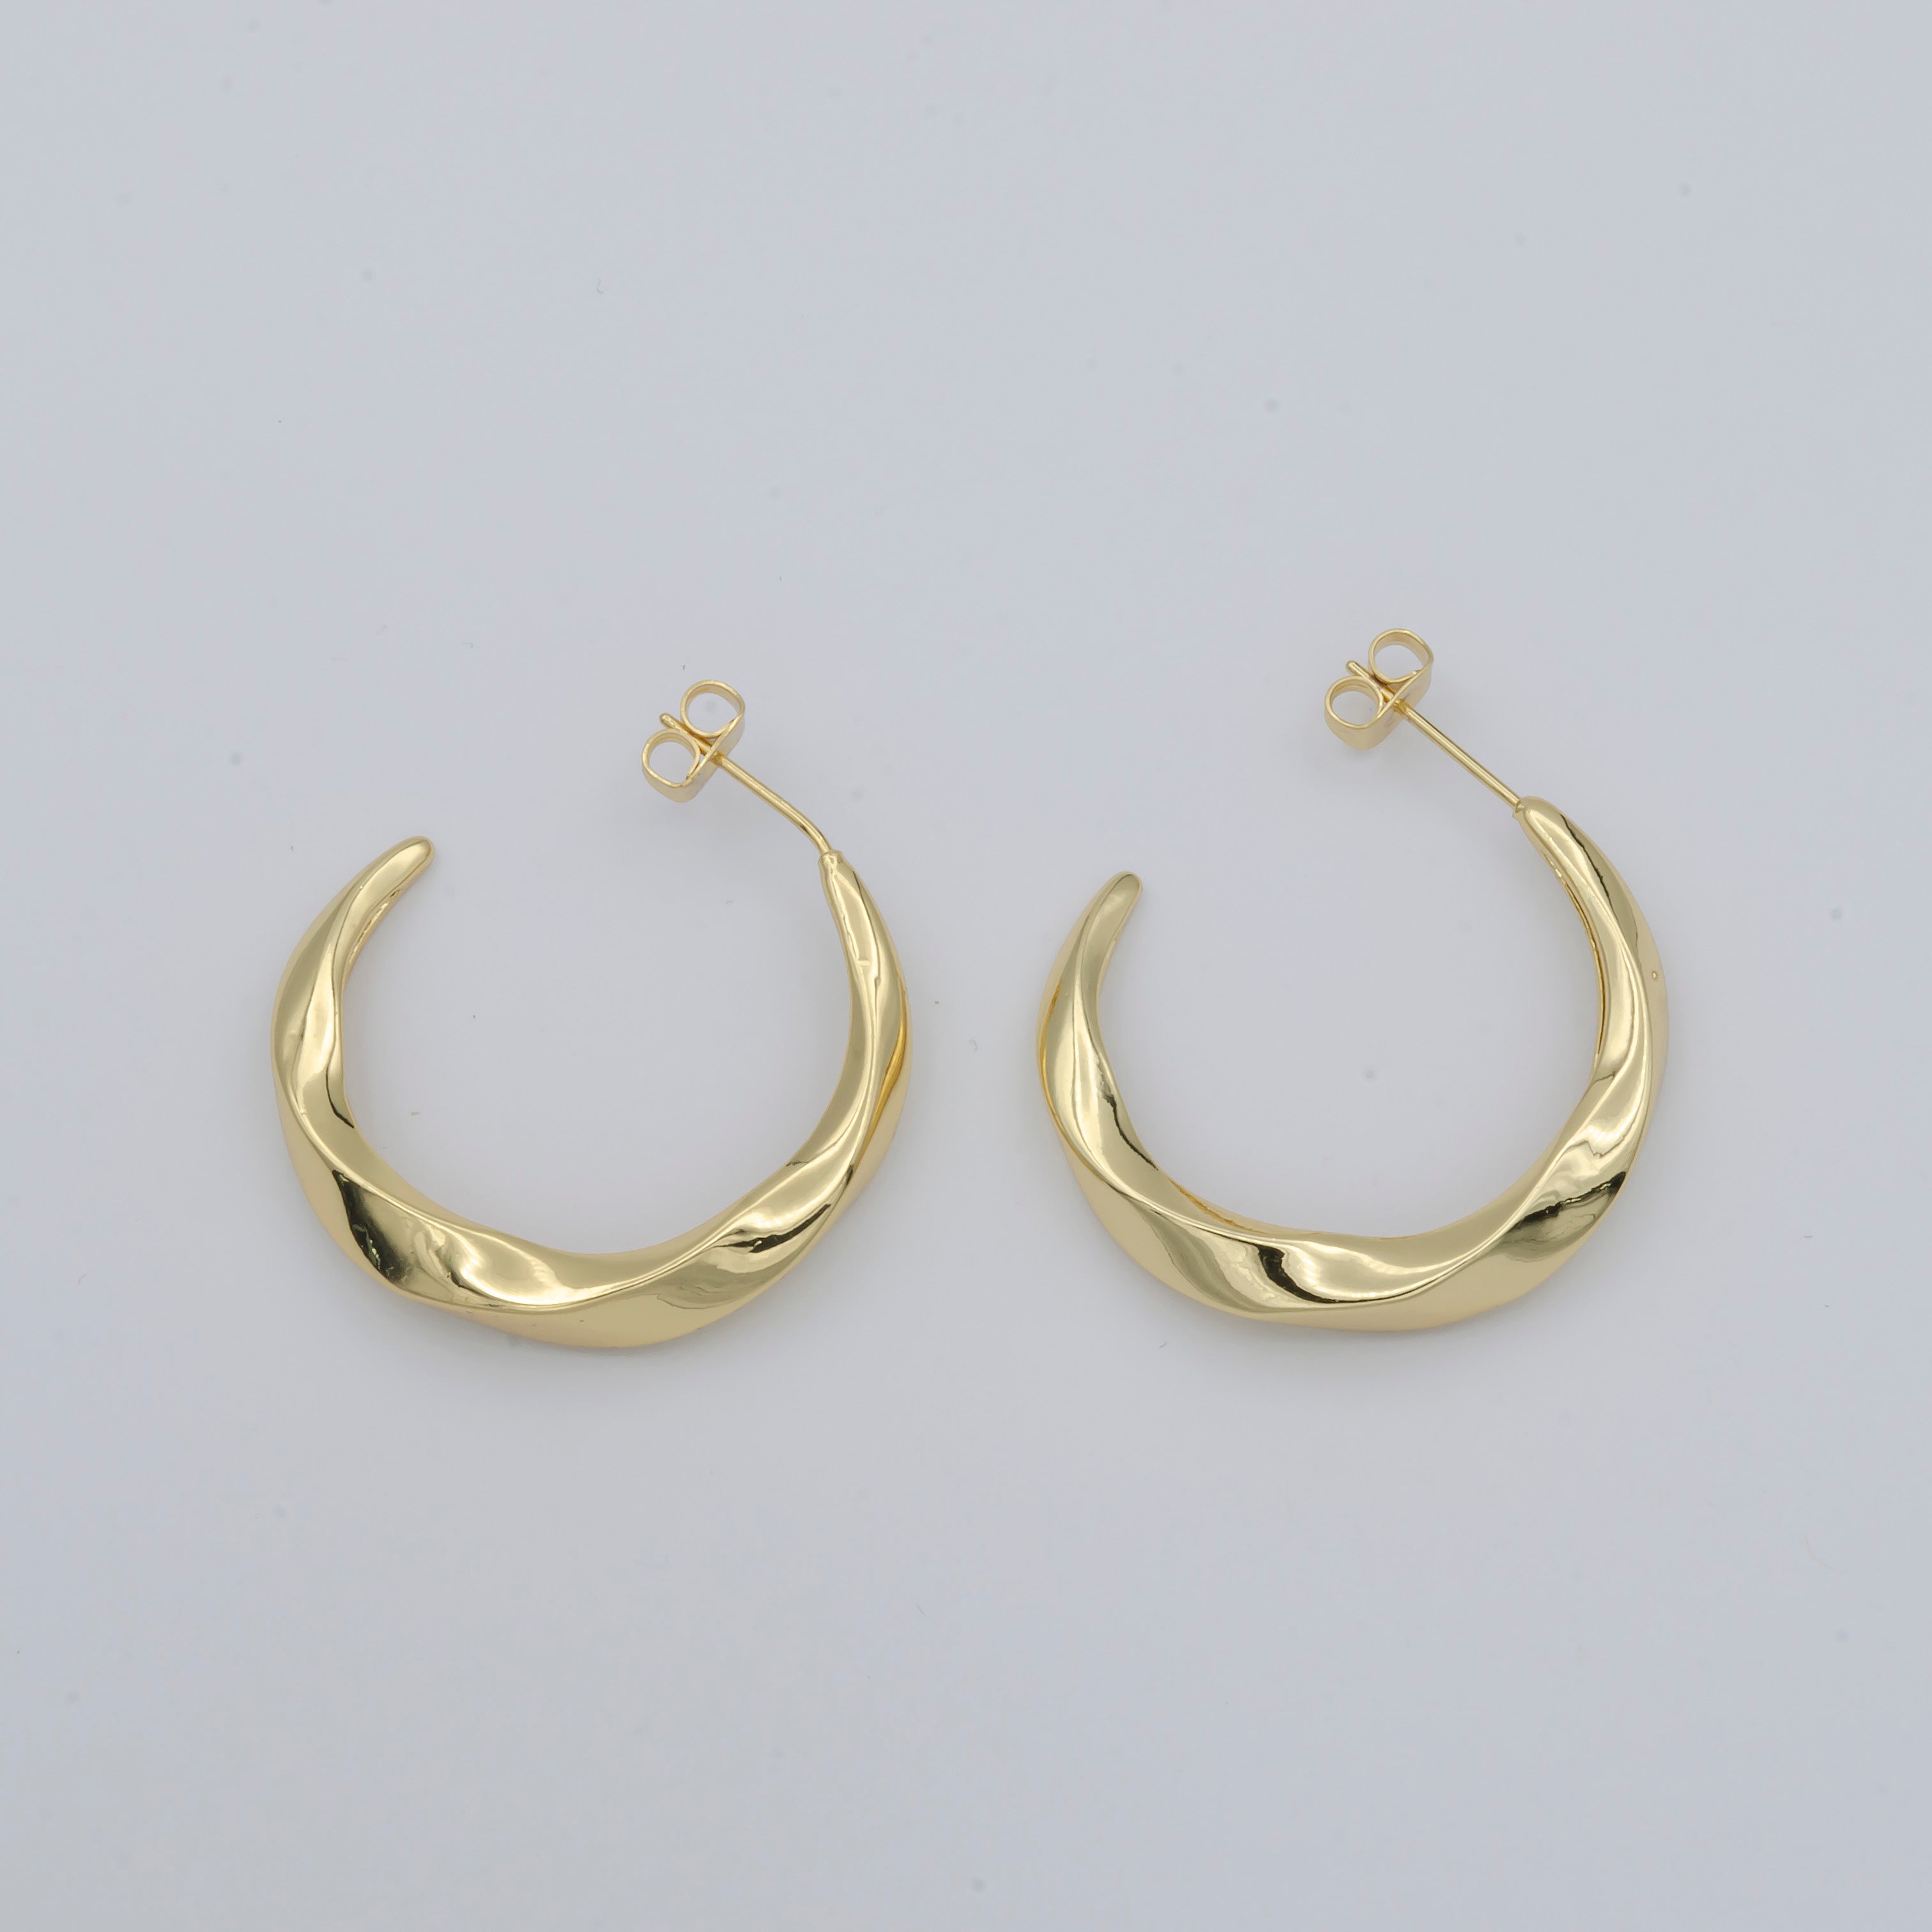 1pair Simple Golden Crescent Model Huggies Earrings, Plain Gold Filled Nature Night Object Formal/Casual Daily Wear Earring Jewelry P117 - DLUXCA